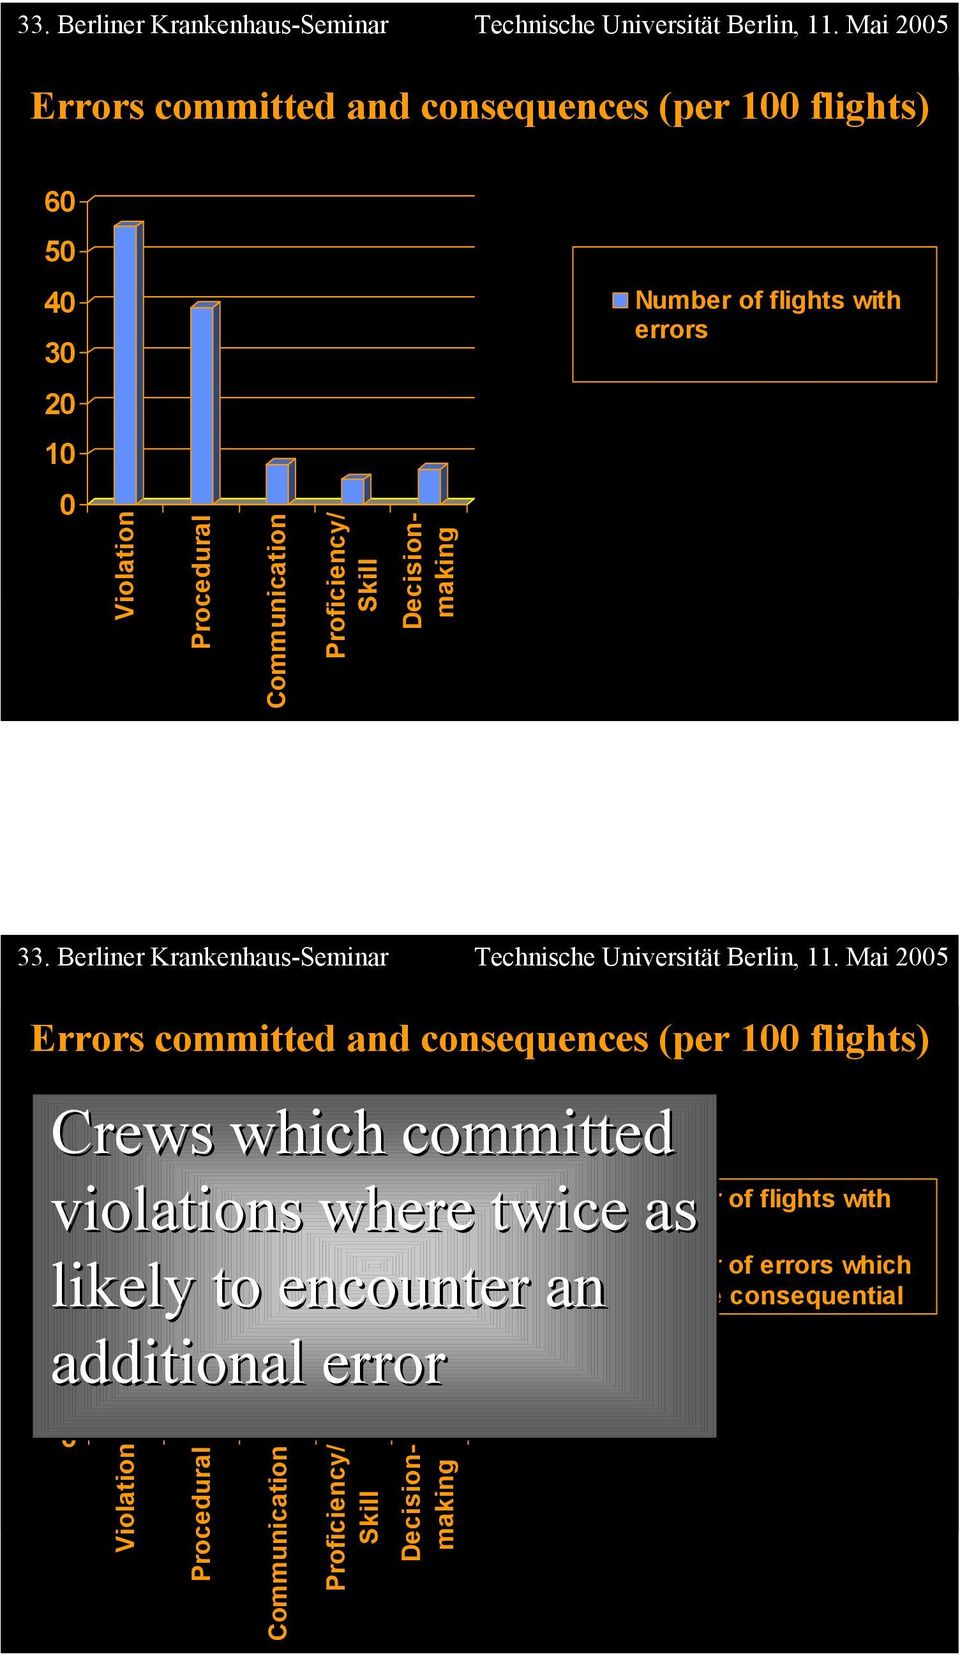 Crews which committed 50 40 violations where twice as 30 likely to encounter an 20 additional error 10 0 Violation